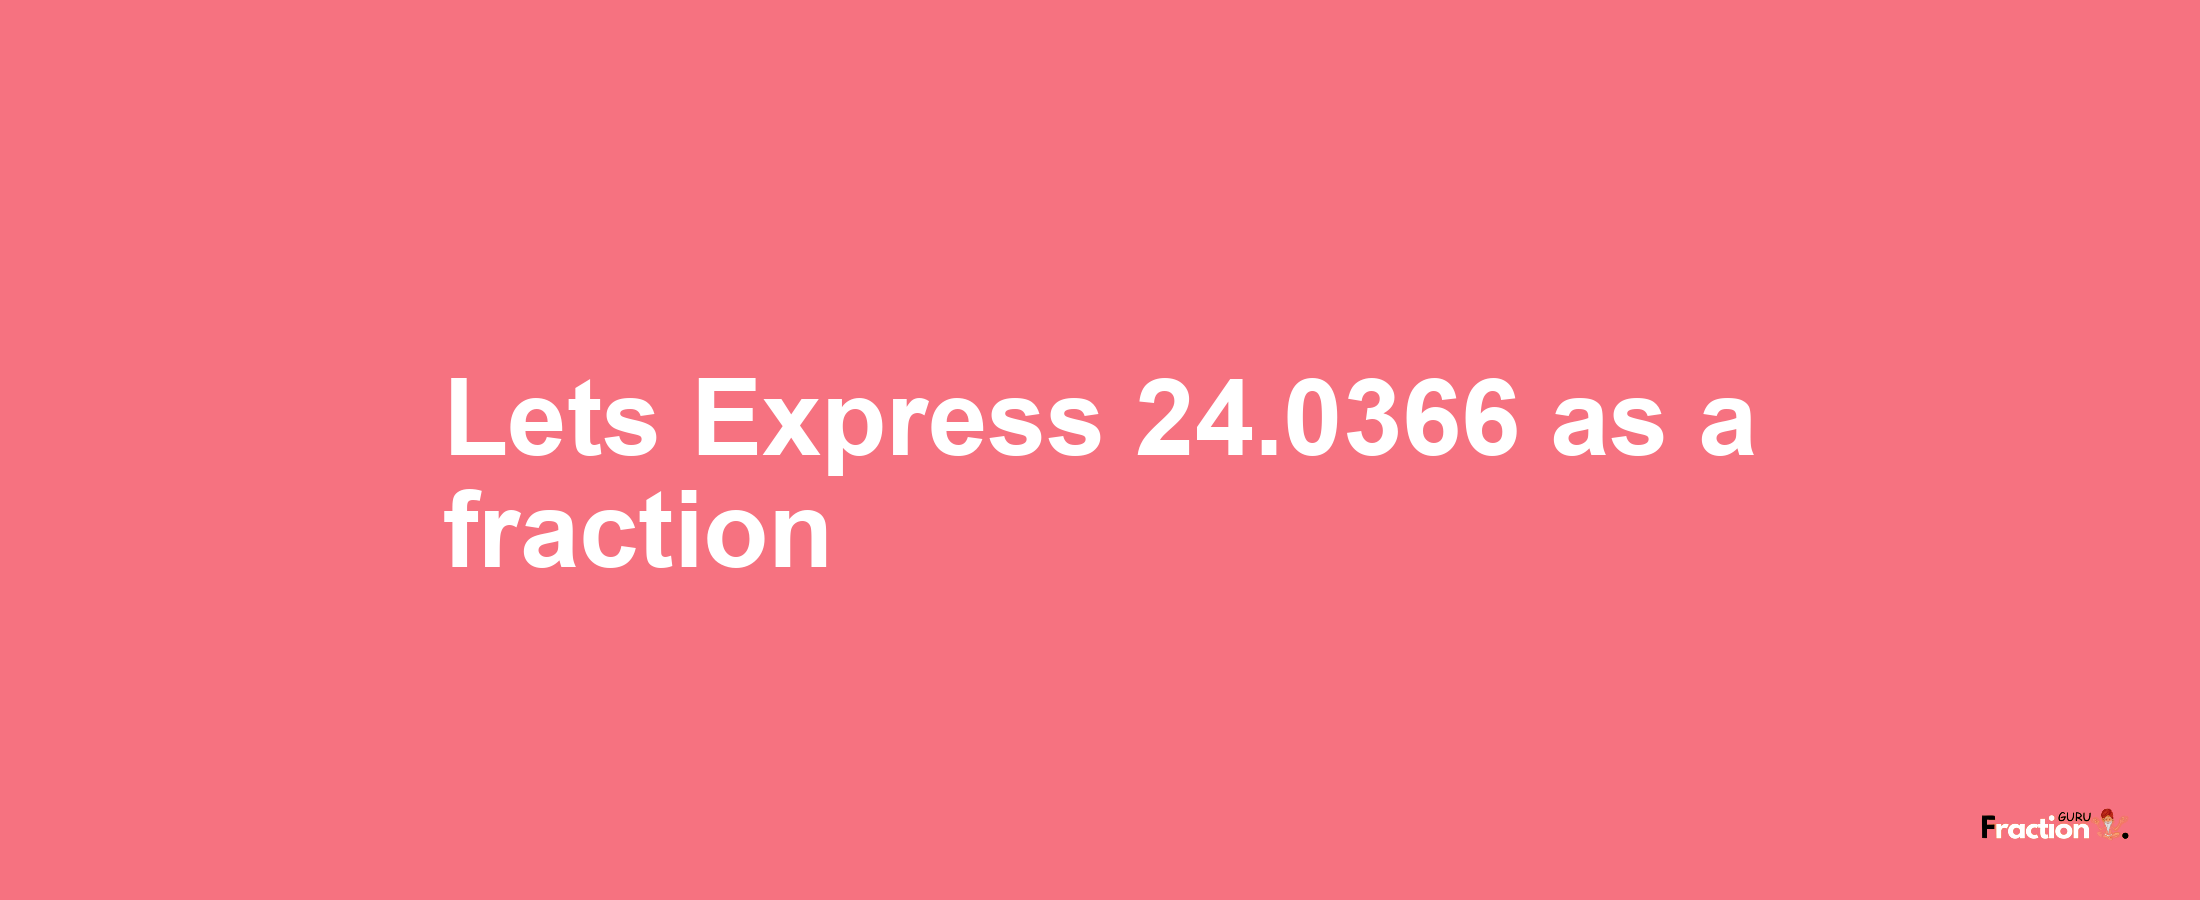 Lets Express 24.0366 as afraction